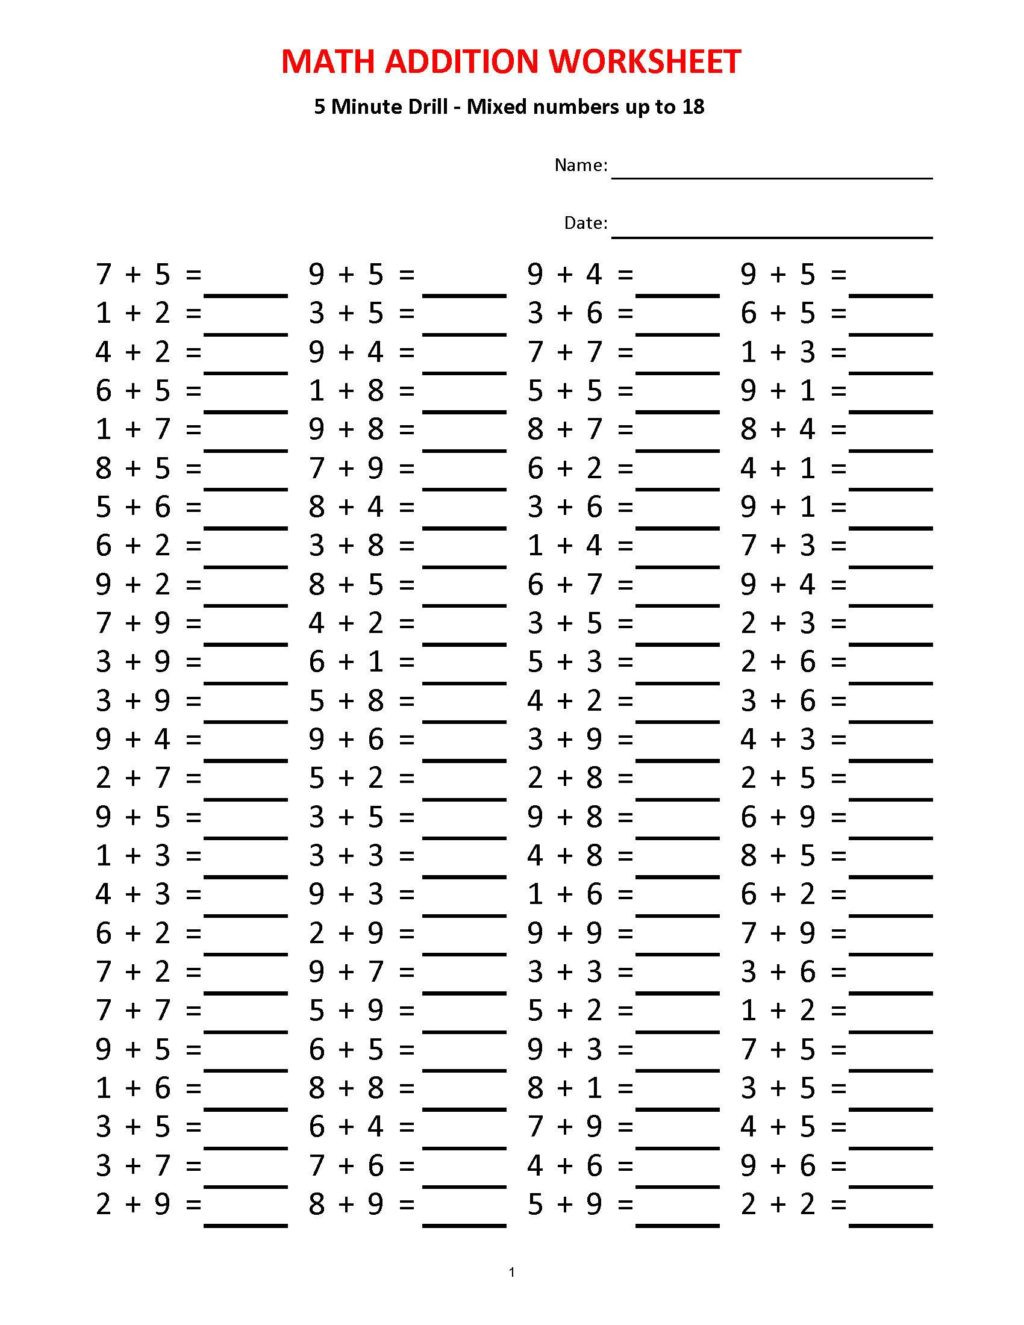 Minute Math Worksheets 1st Grade Worksheet Addition Minute Drill Hth Worksheets with Etsy